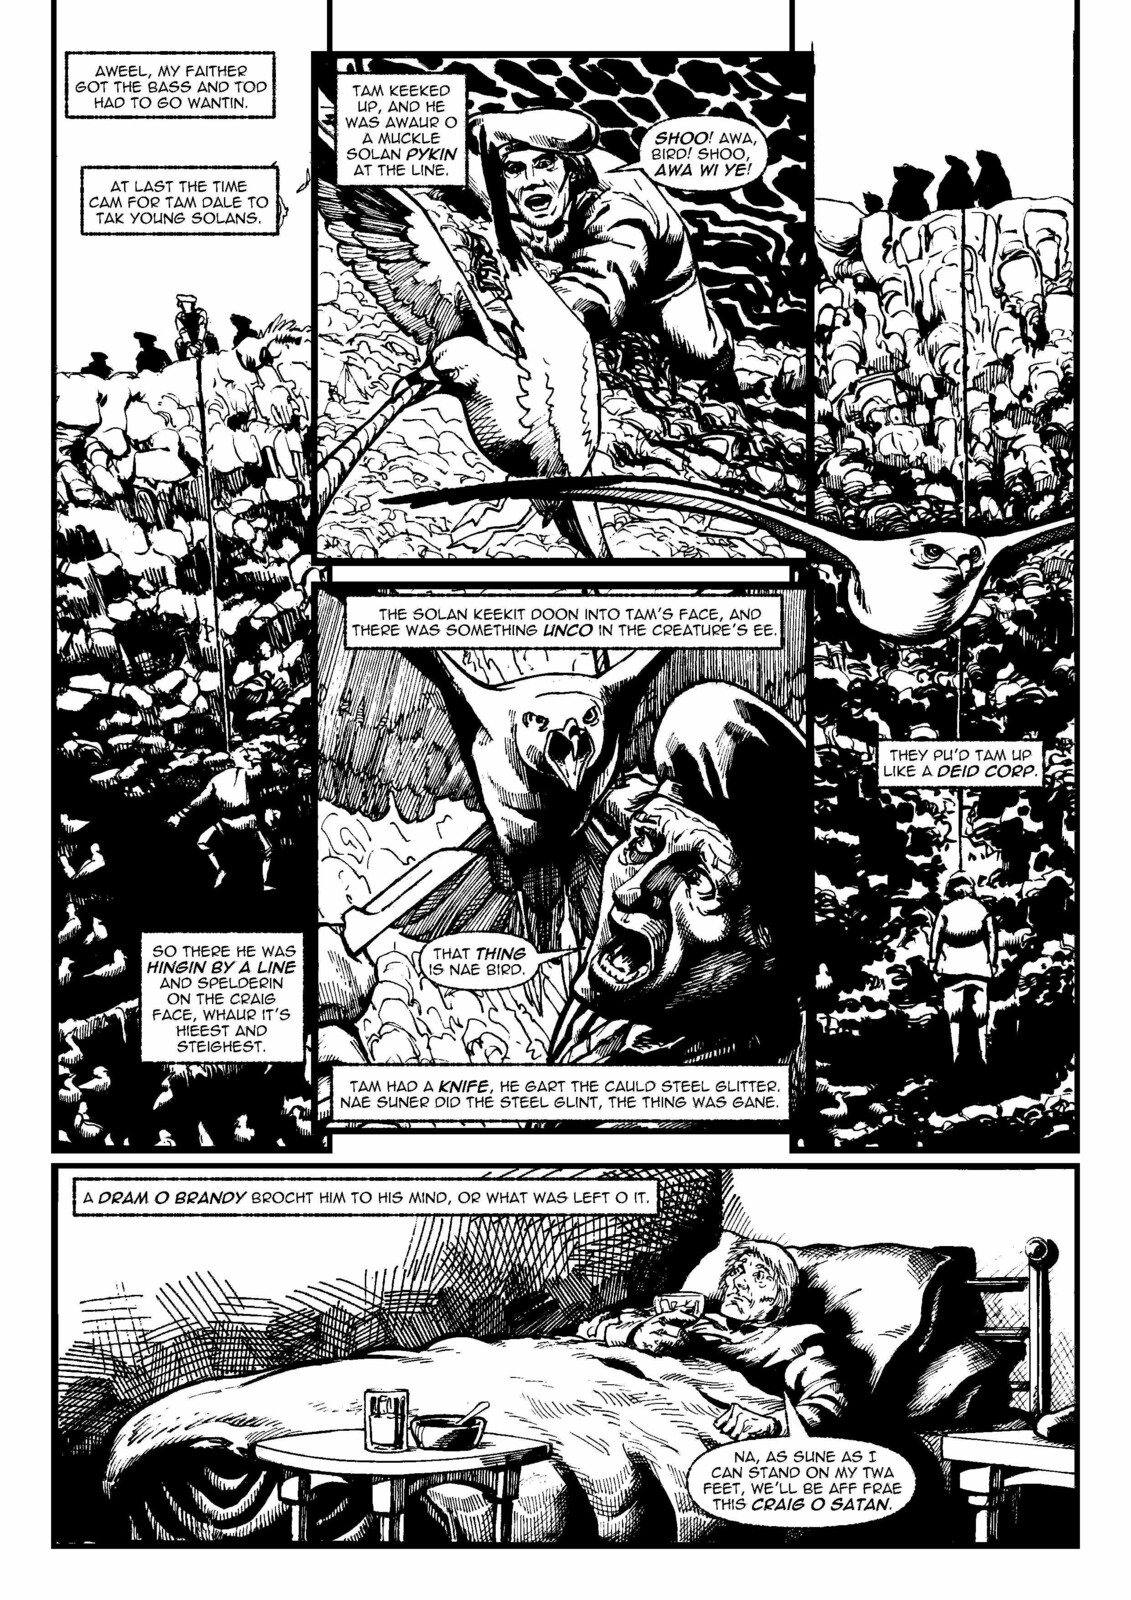 Page 6 of the Tale O Tod Lapraik